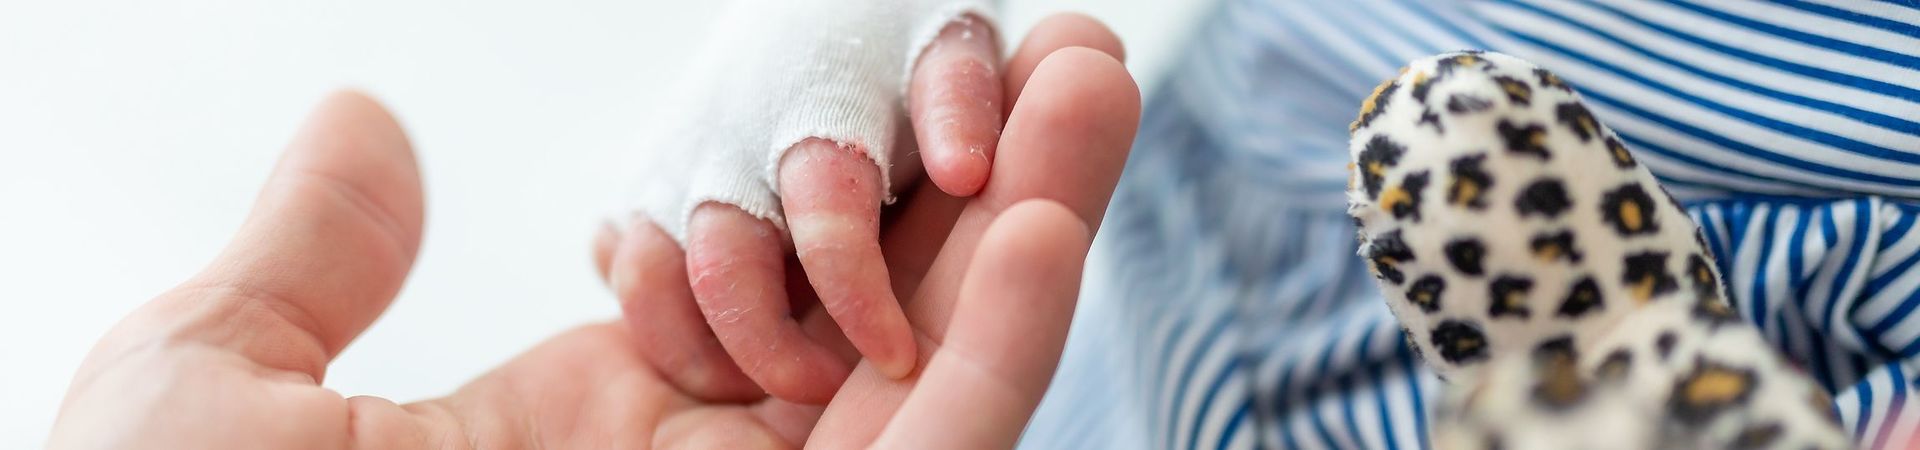 Hand in dressings of a child with EB being hold by the hand of a care person